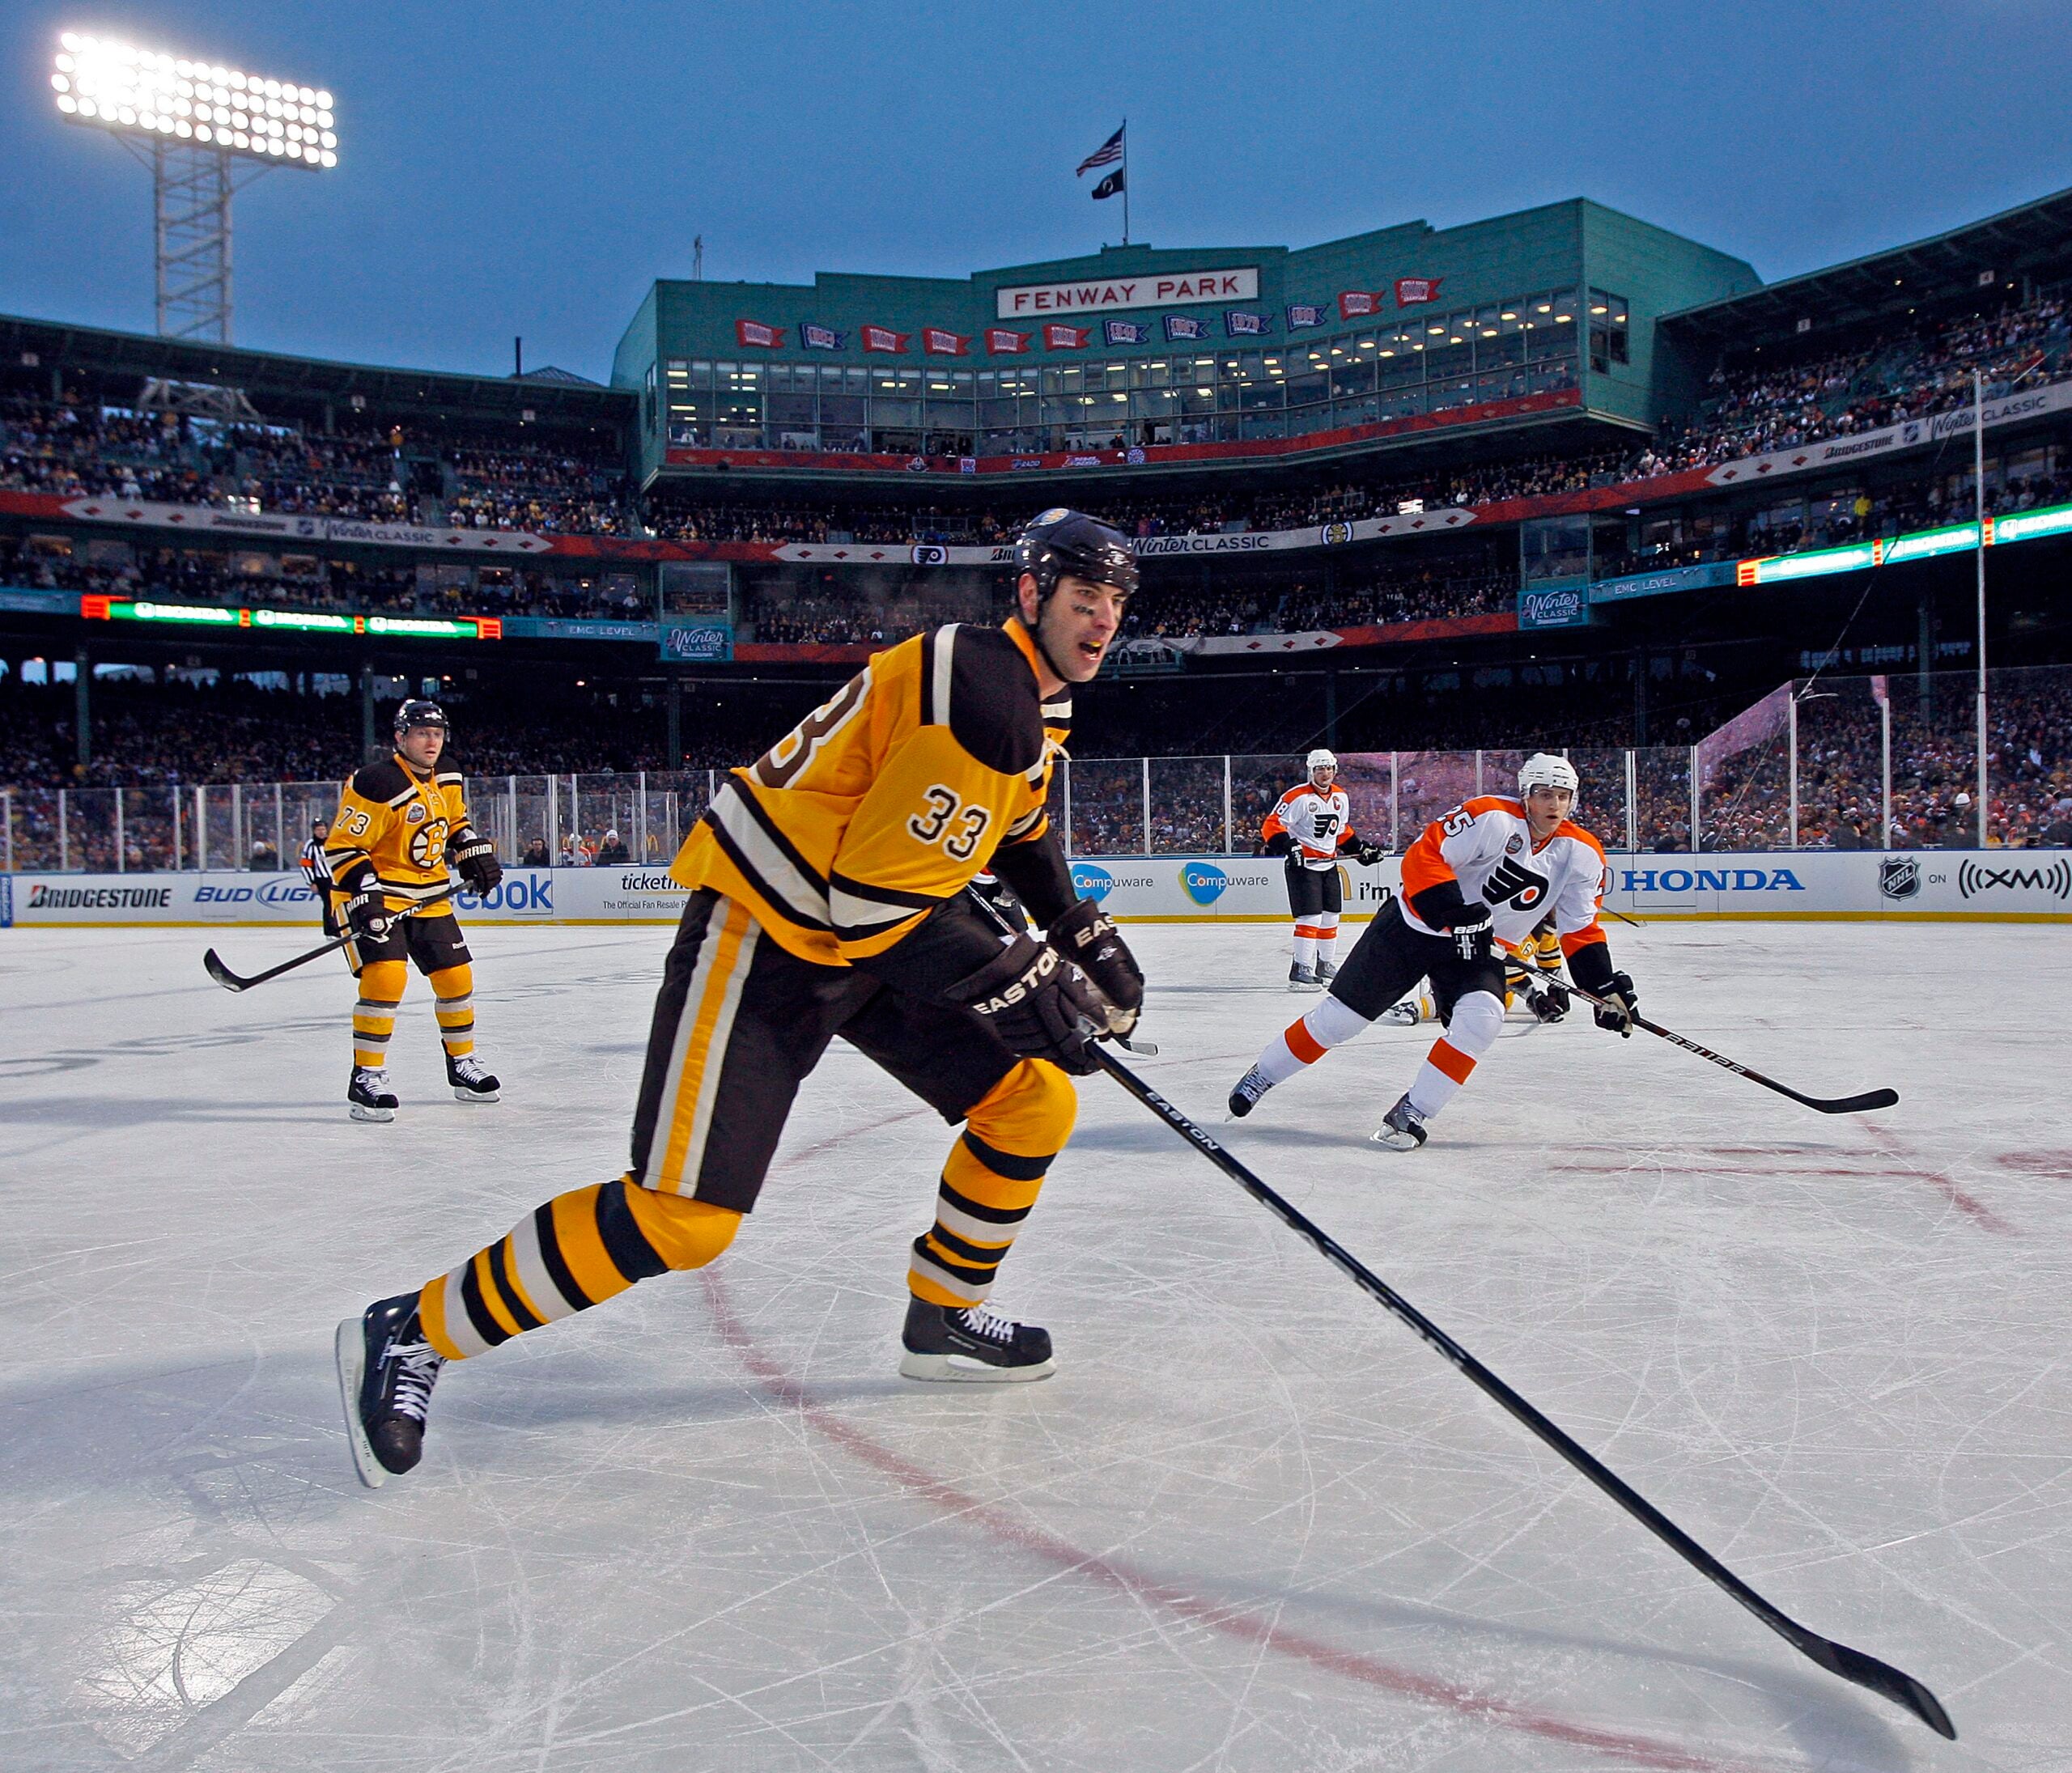 Check Out Bruins' Winter Classic Jerseys For Fenway Park Showdown 